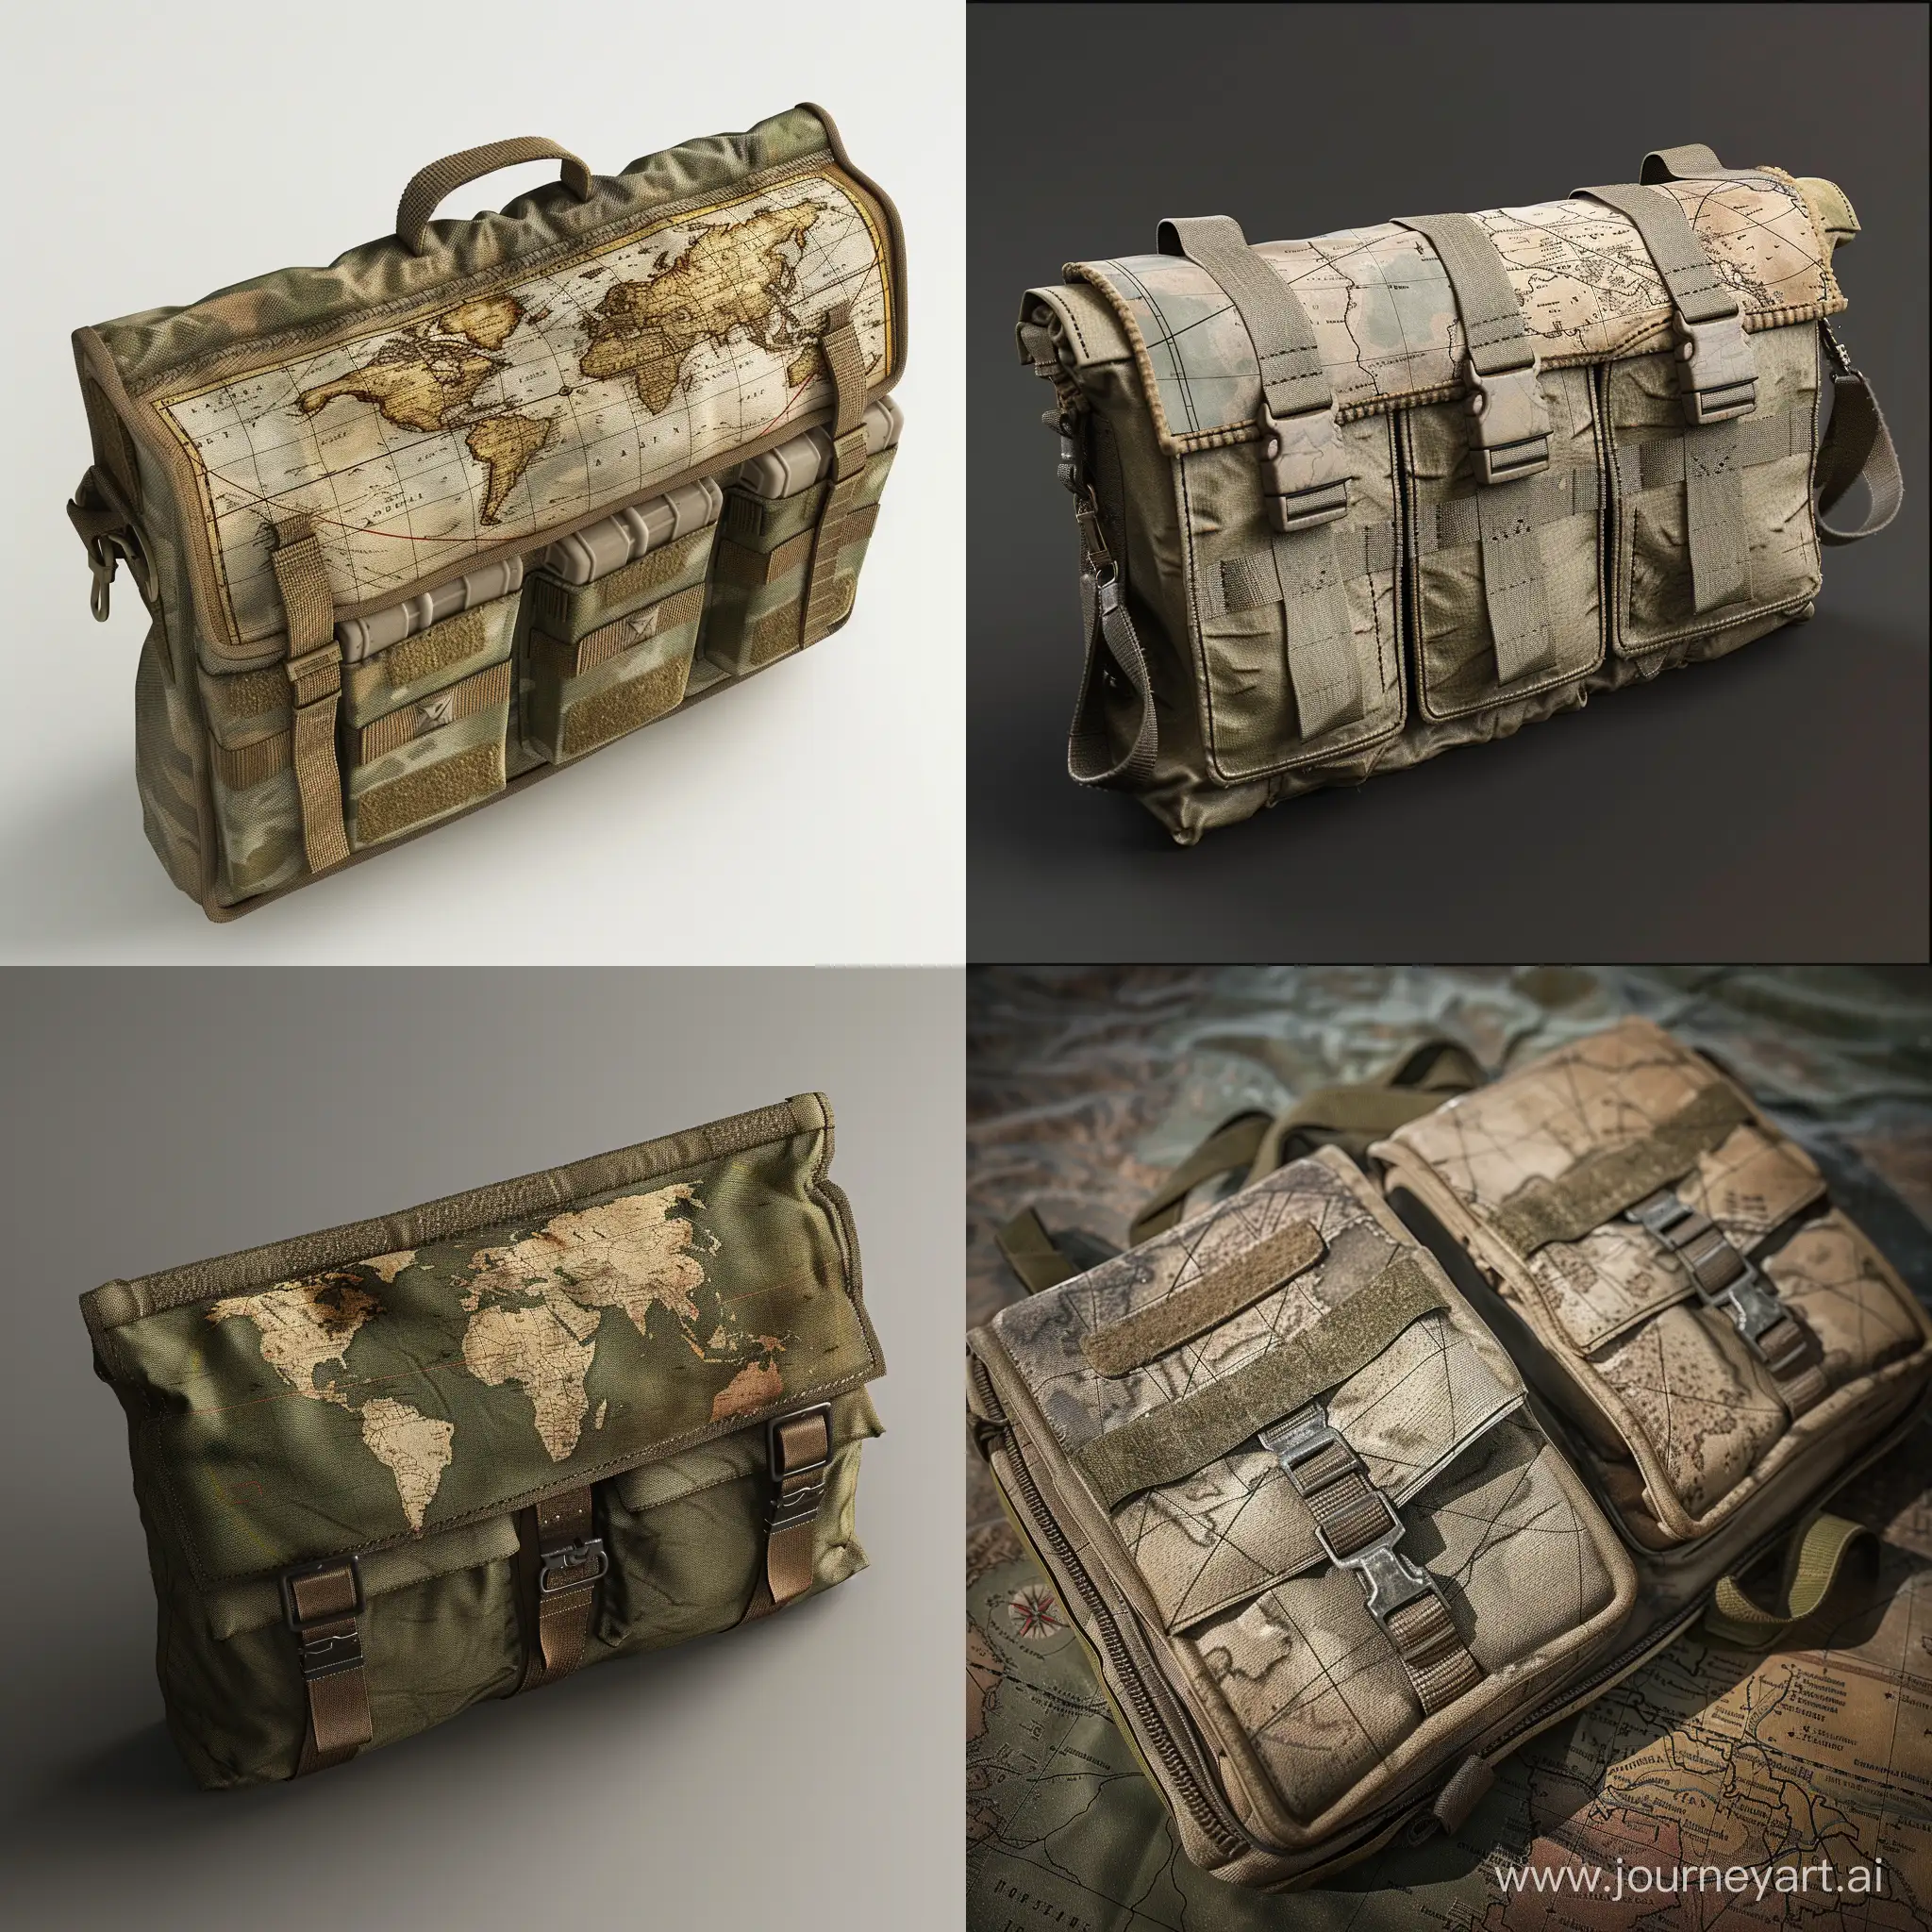 old military map cartographic kit isometric in tactical military pouch realistic 3d render